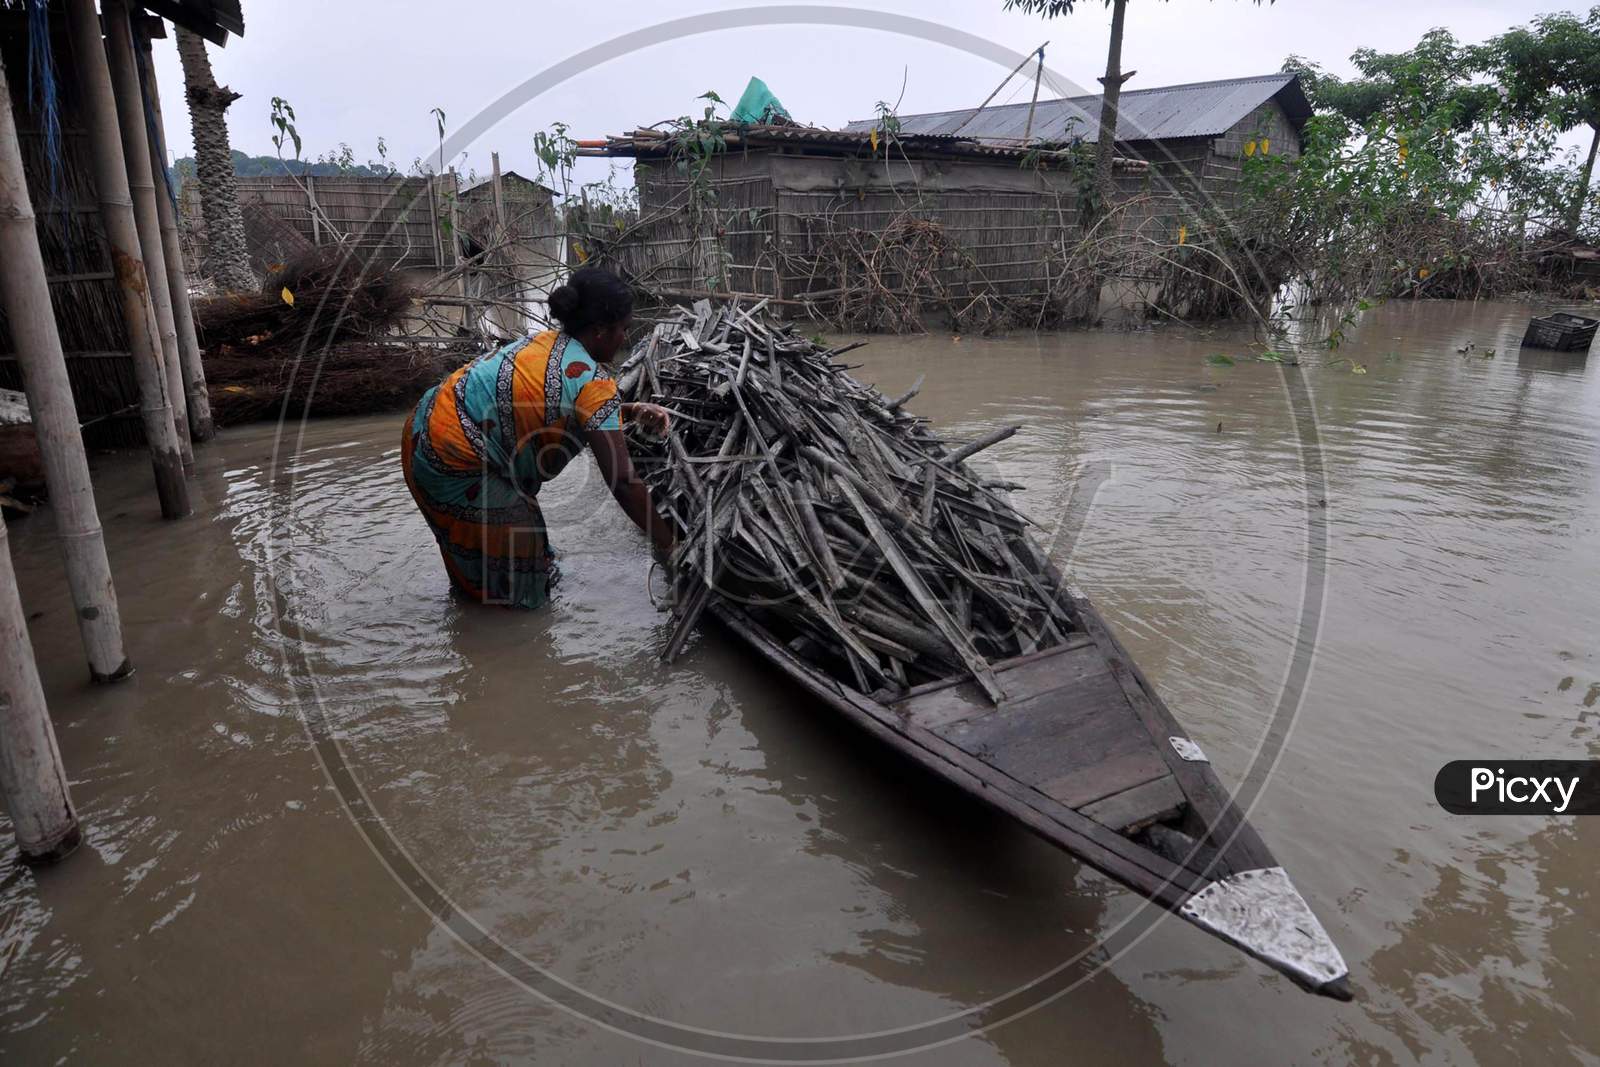 A woman collects firewood in the flood-affected area of Puthimari Village in Darrang, Assam on July 21, 2020